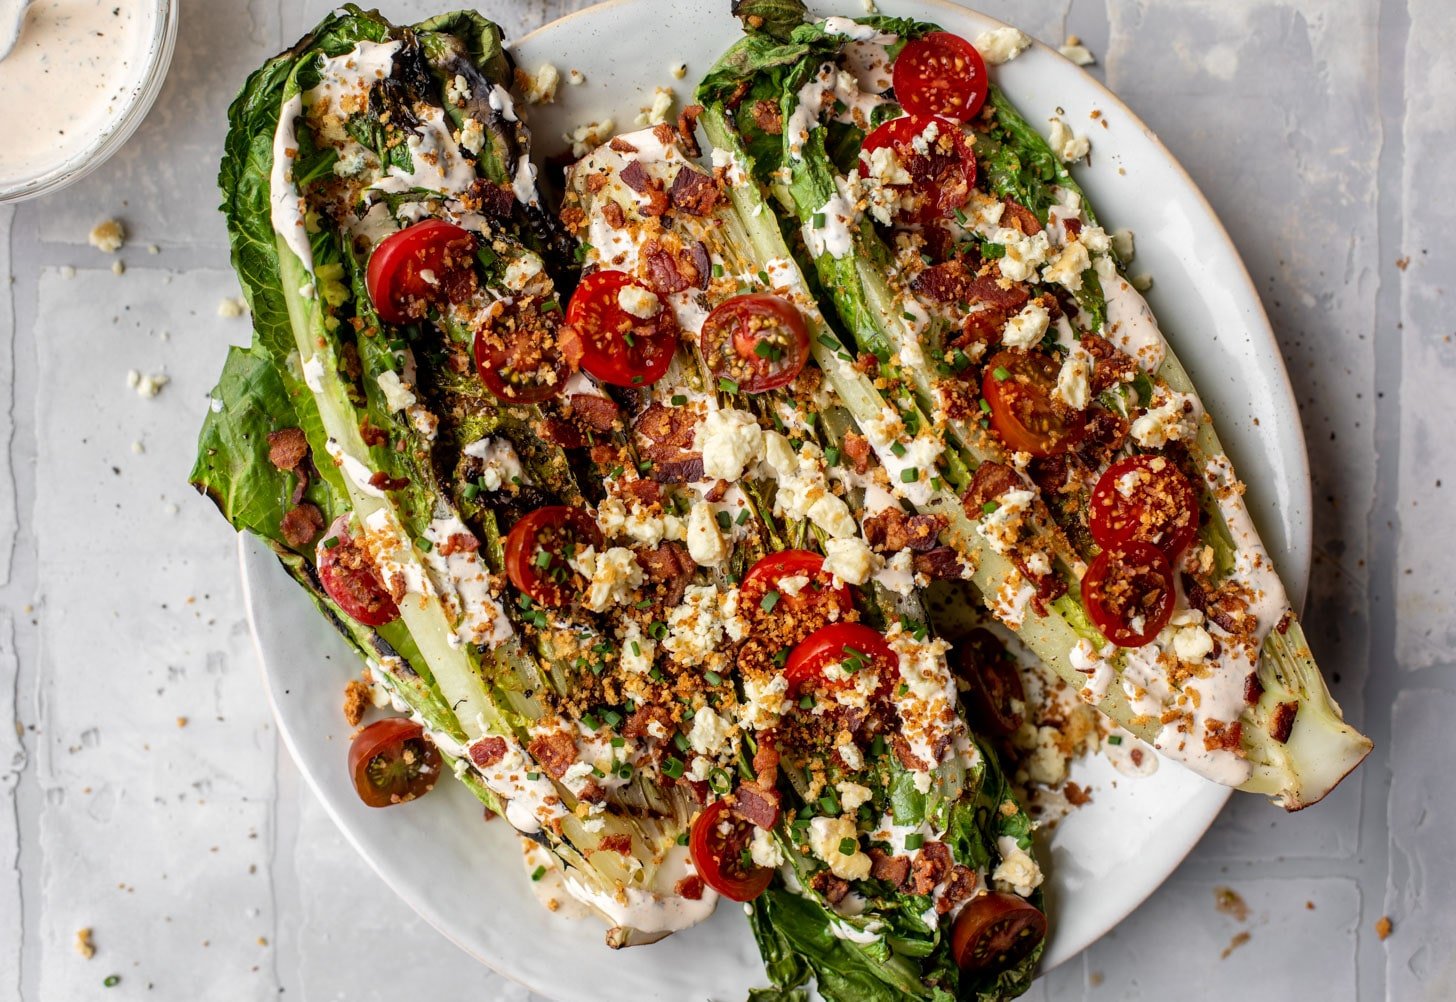 grilled romaine salads with tomatoes, bacon and ranch